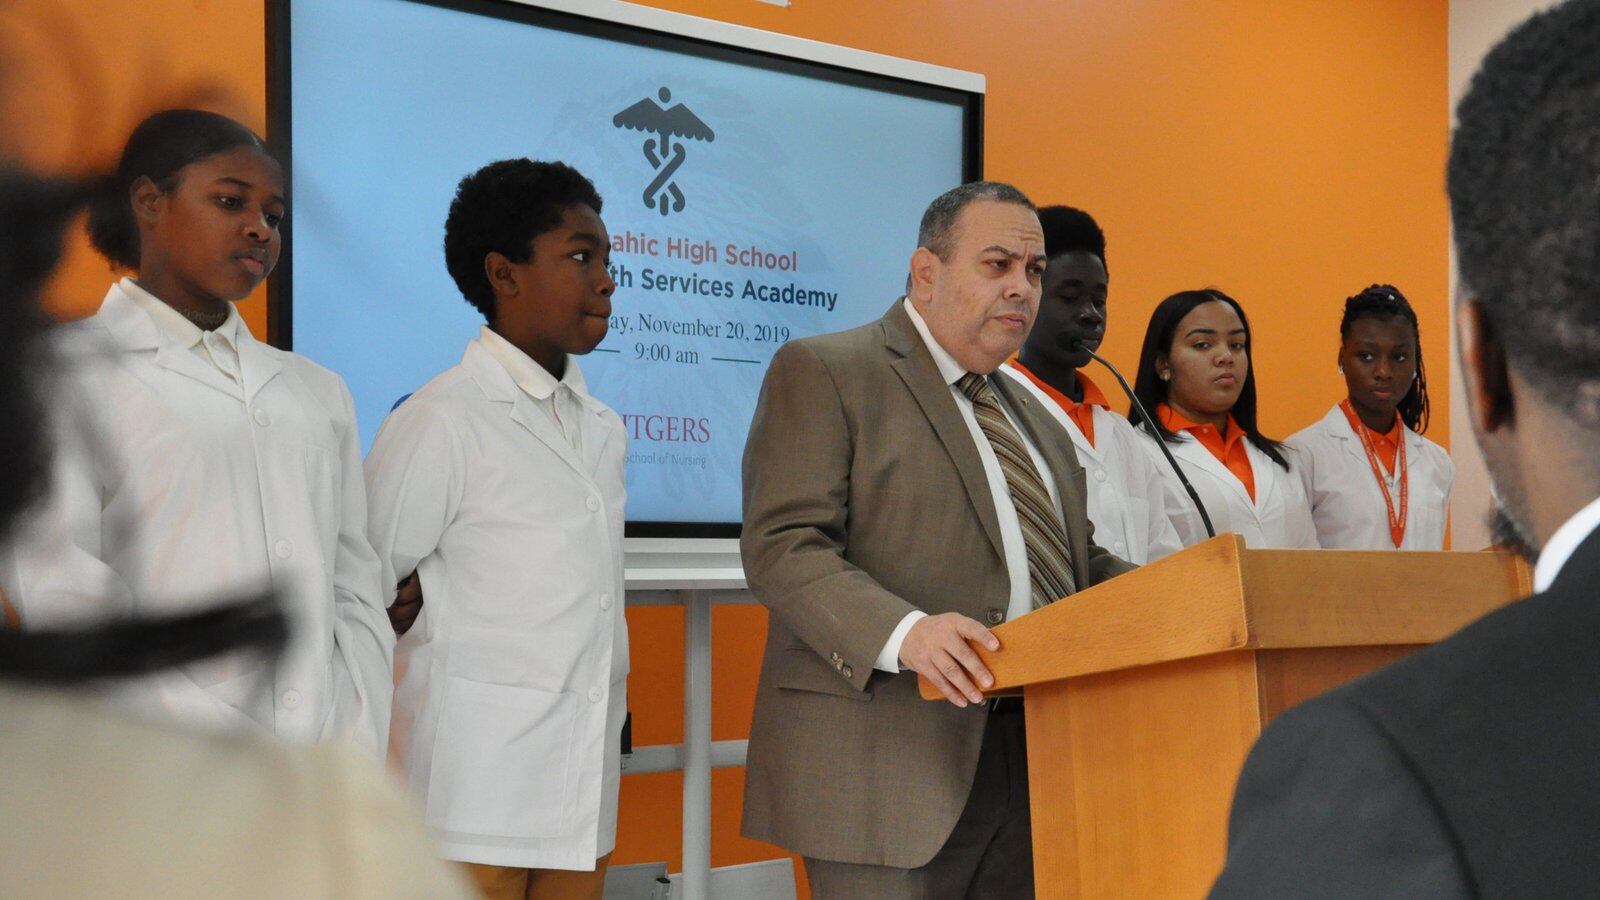 Flanked by Weequahic High School students, Newark superintendent Roger León announces a new allied health career academy.